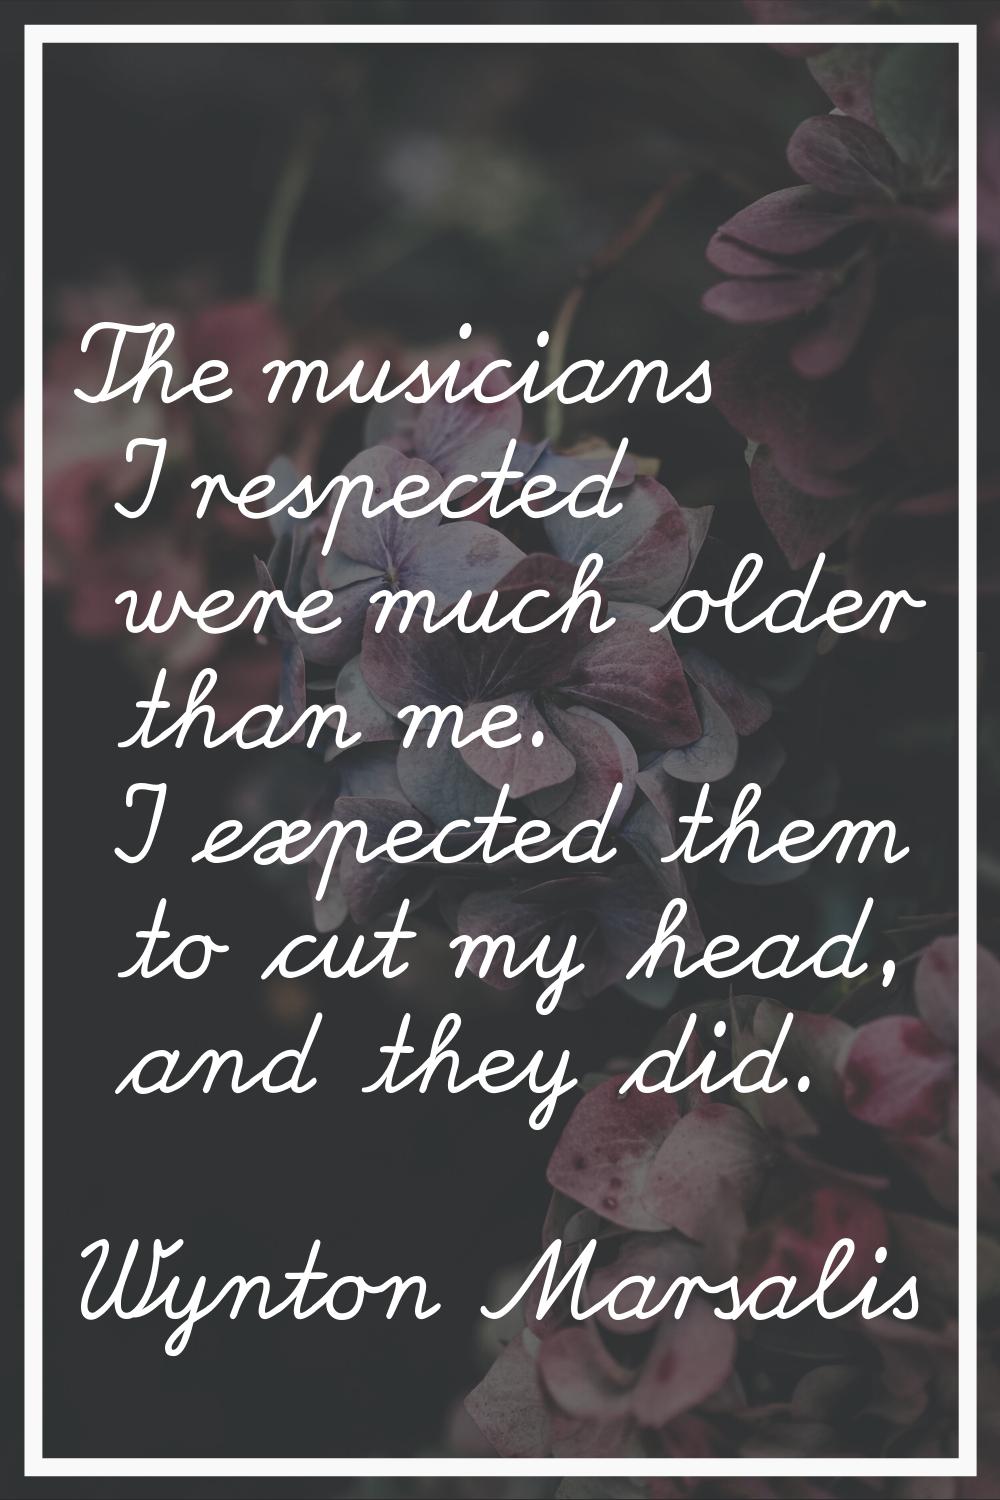 The musicians I respected were much older than me. I expected them to cut my head, and they did.